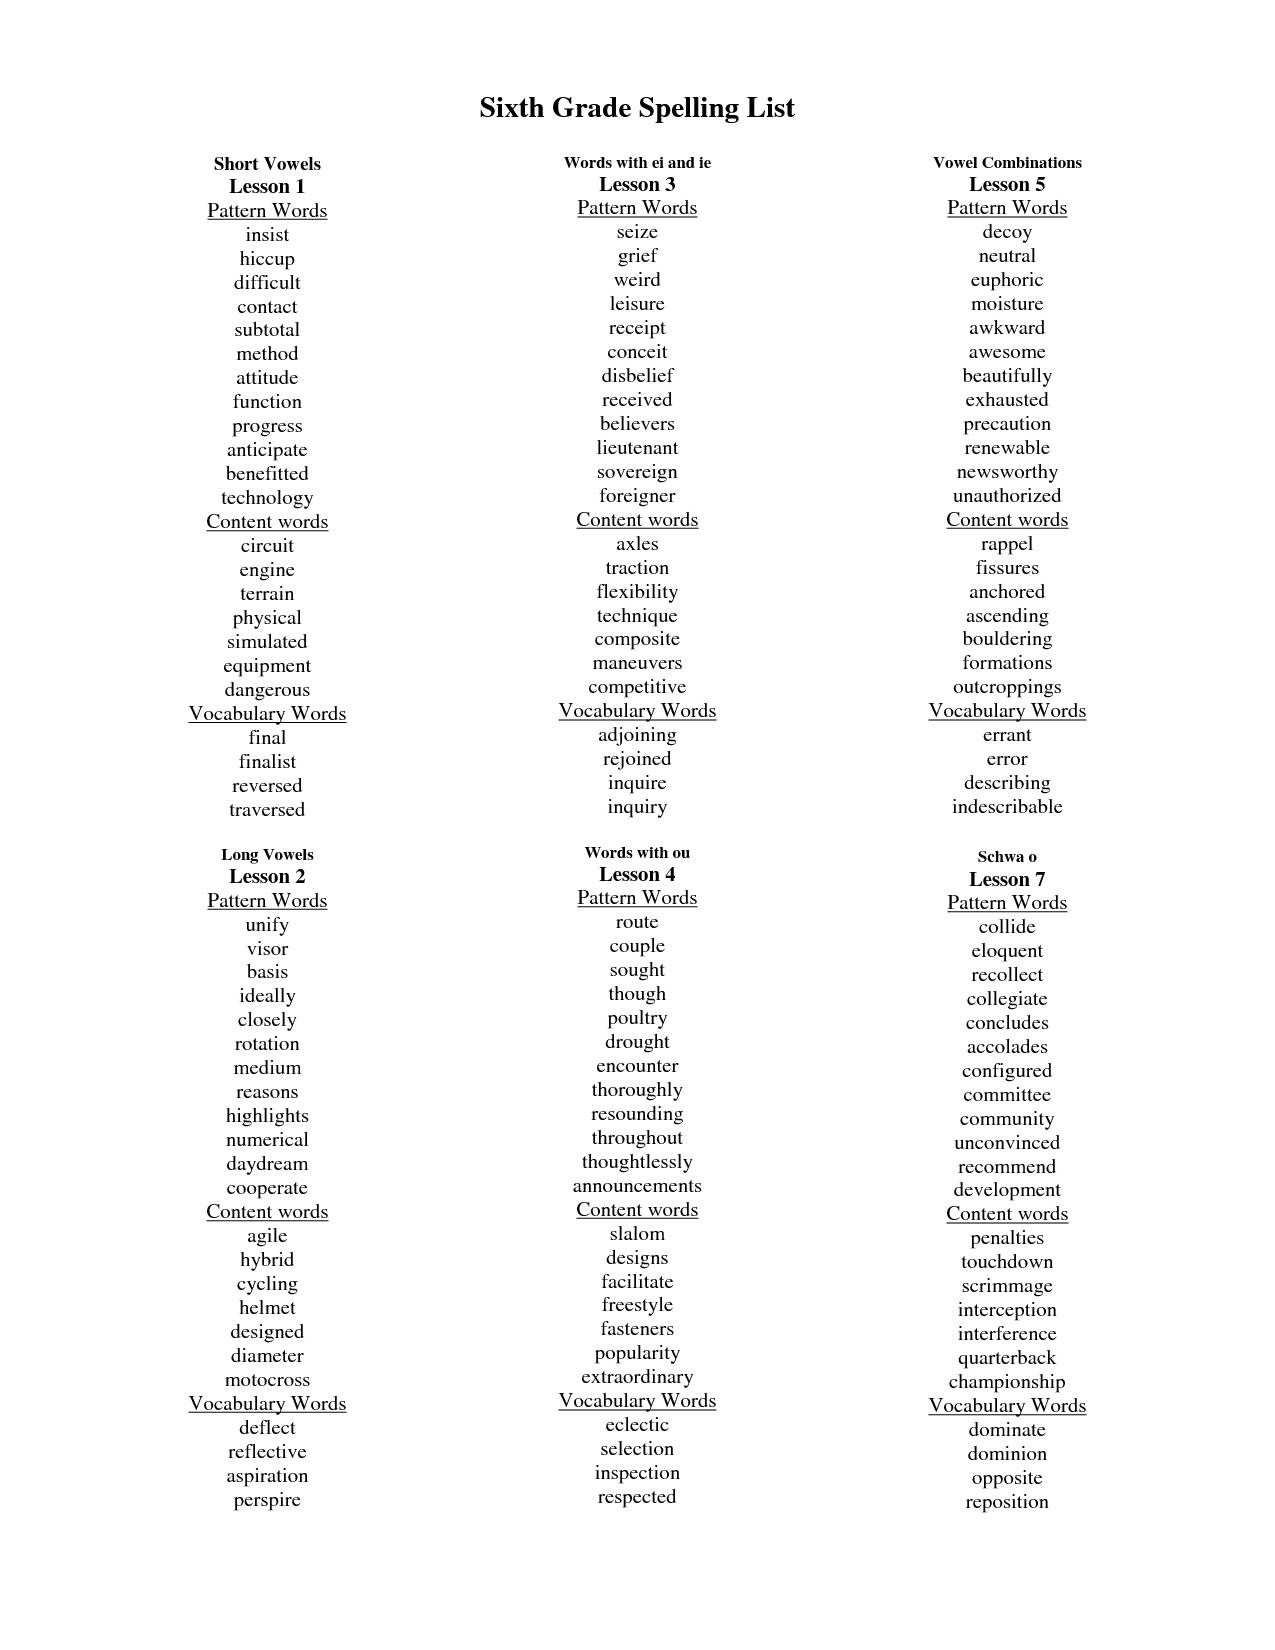 16 Best Images of Multisyllabic Words Worksheets 5th Grade - 9th Grade